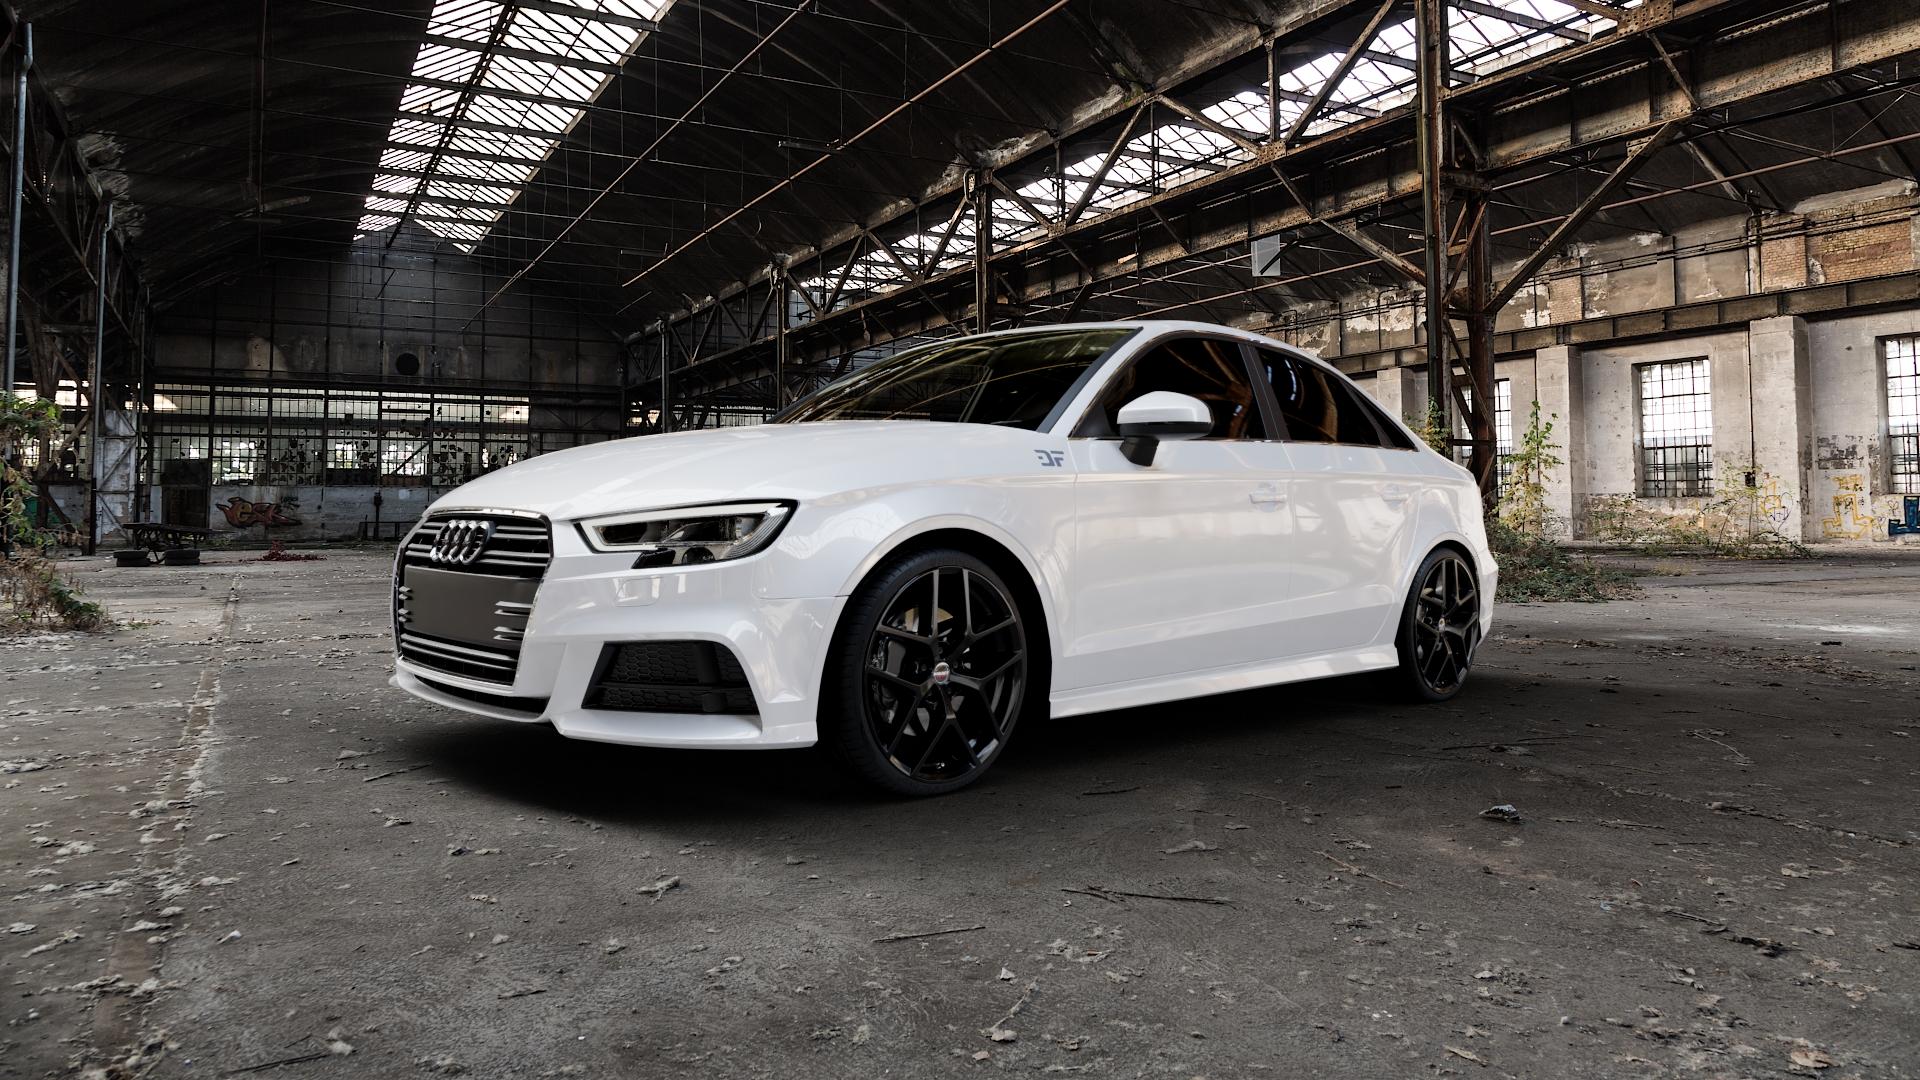 Audi A3 Type 8V (Limousine) Facelift 2,5l TFSI quattro 294kW RS3 (400 hp)  Wheels and Tyre Packages | velonity.com